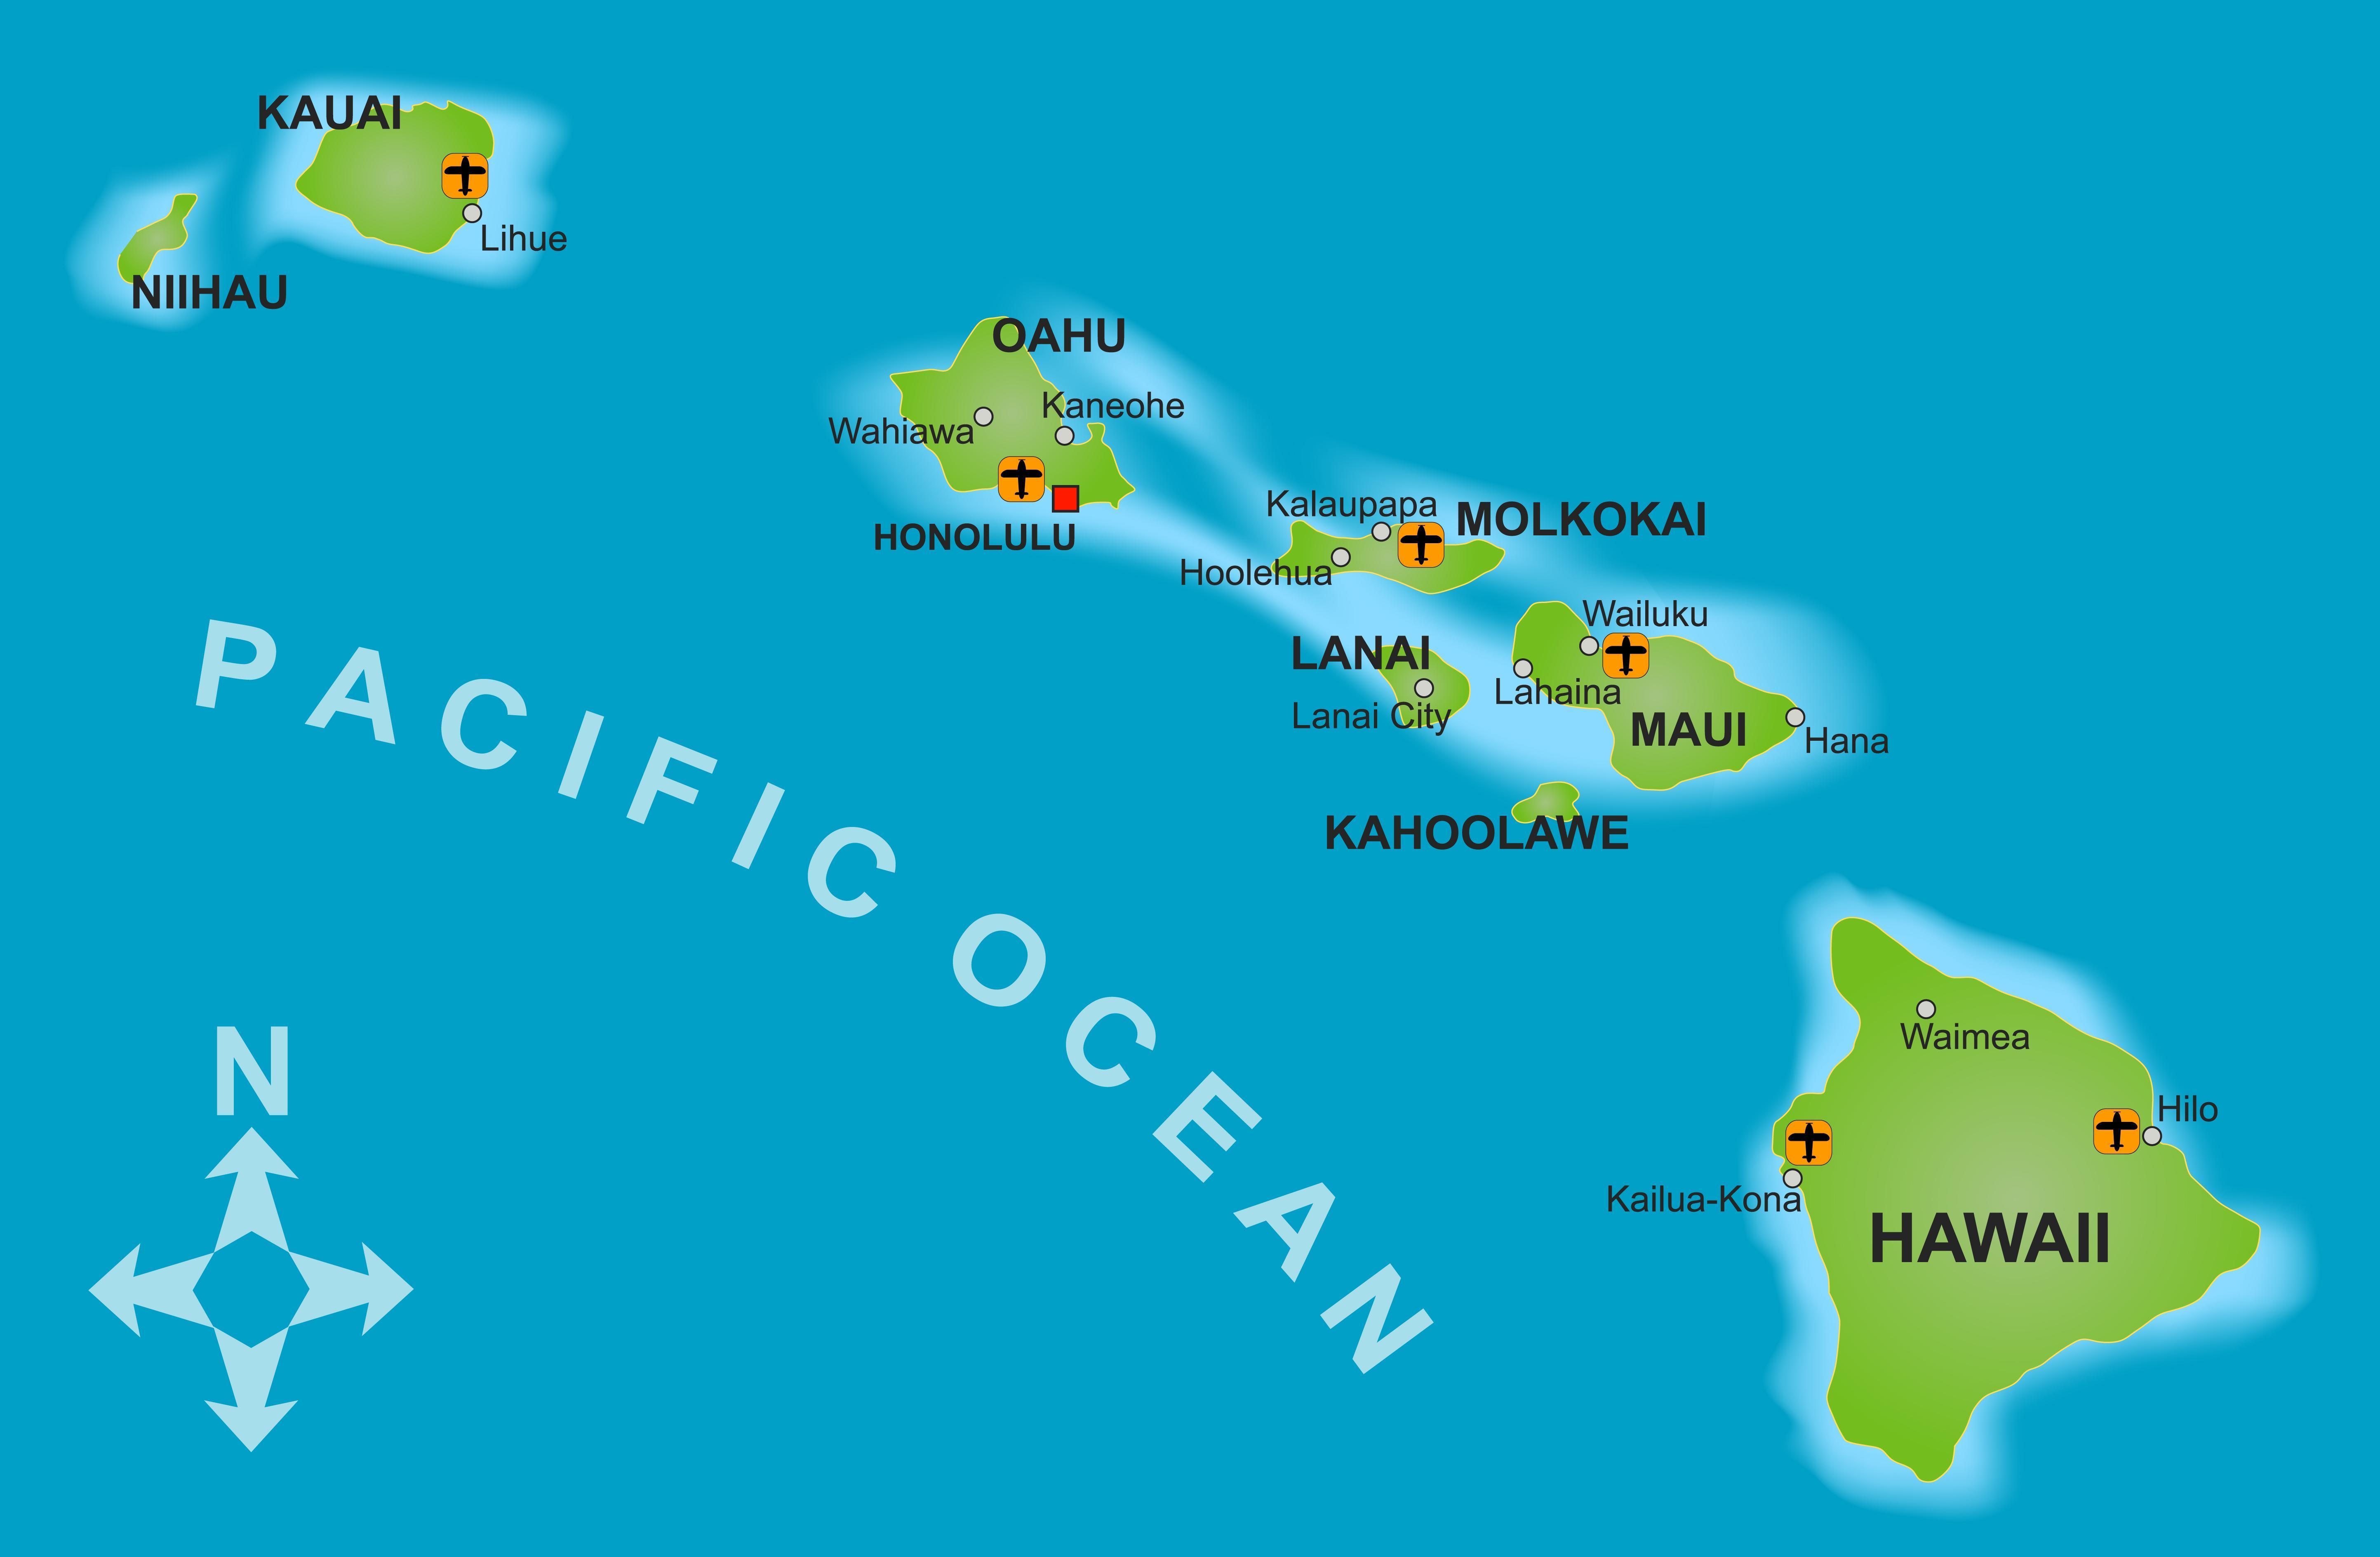 The Volcanic Islands Of Hawaii Formed At Different Times. The Islands Are Arranged In A Chain. Based